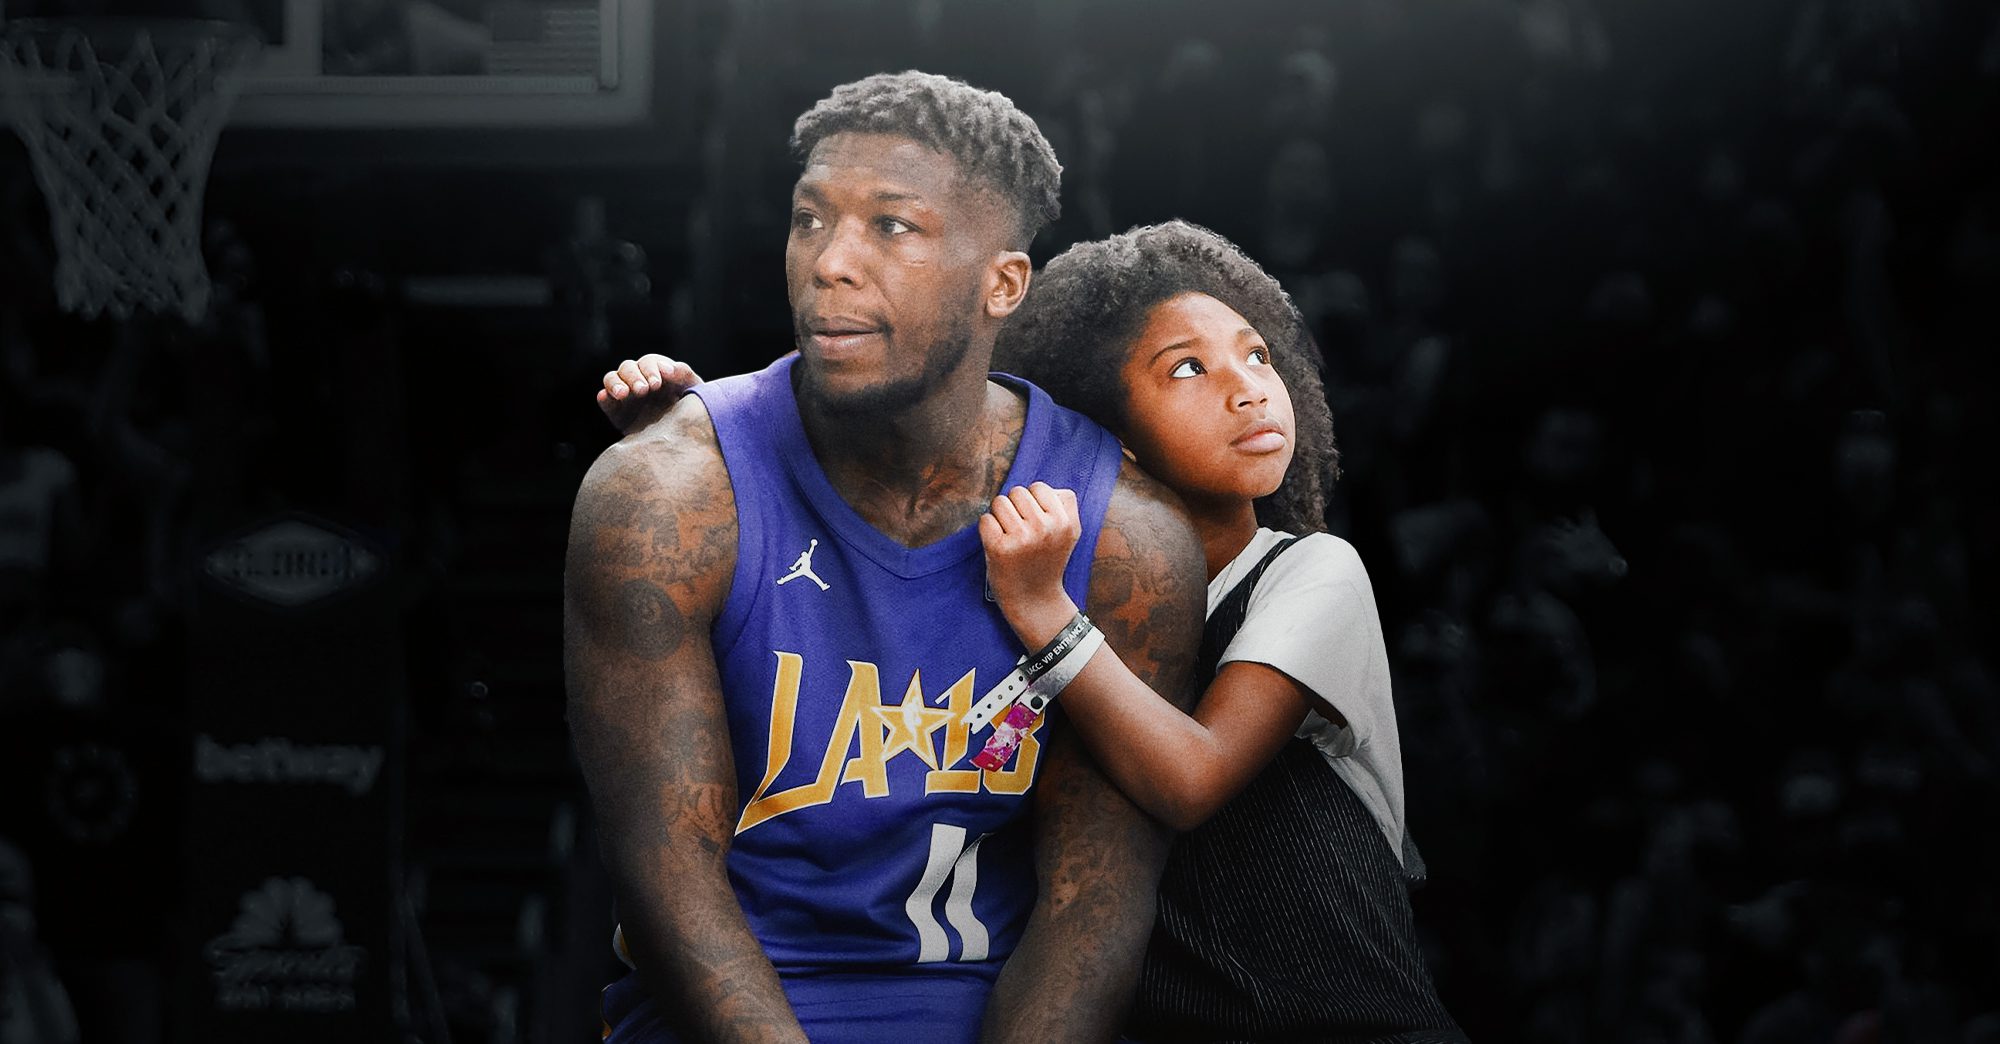 Nate Robinson Reveals He ‘Doesn’t Have Long to Live’